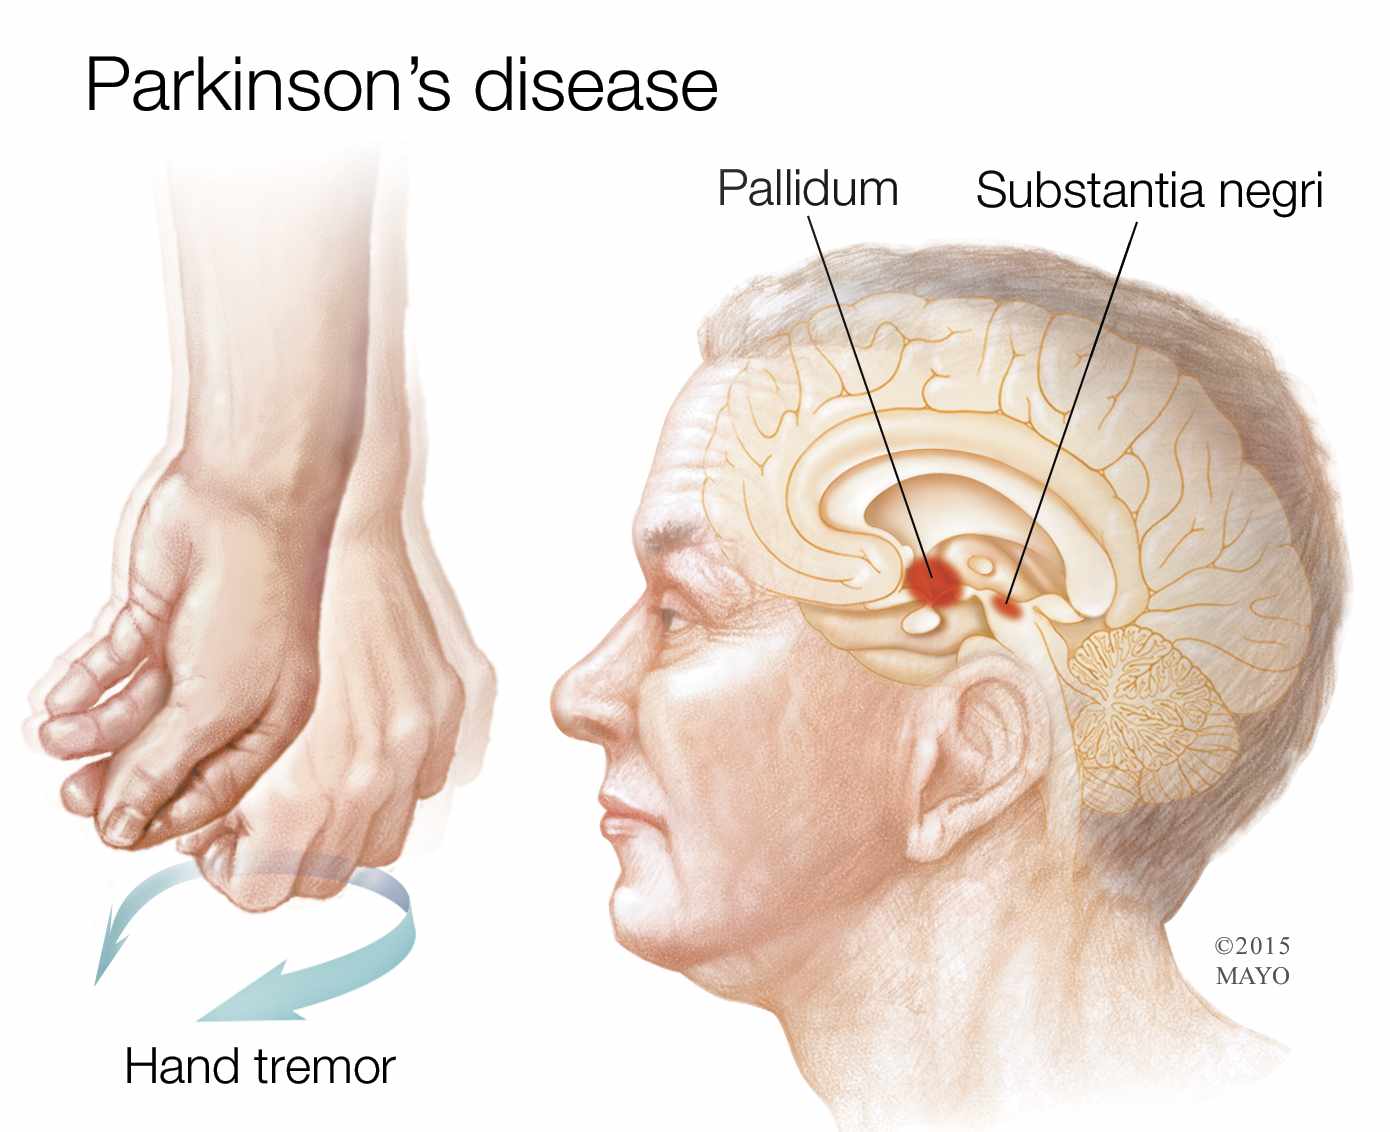 medical illustration showing hand tremor due to Parkinson's Disease